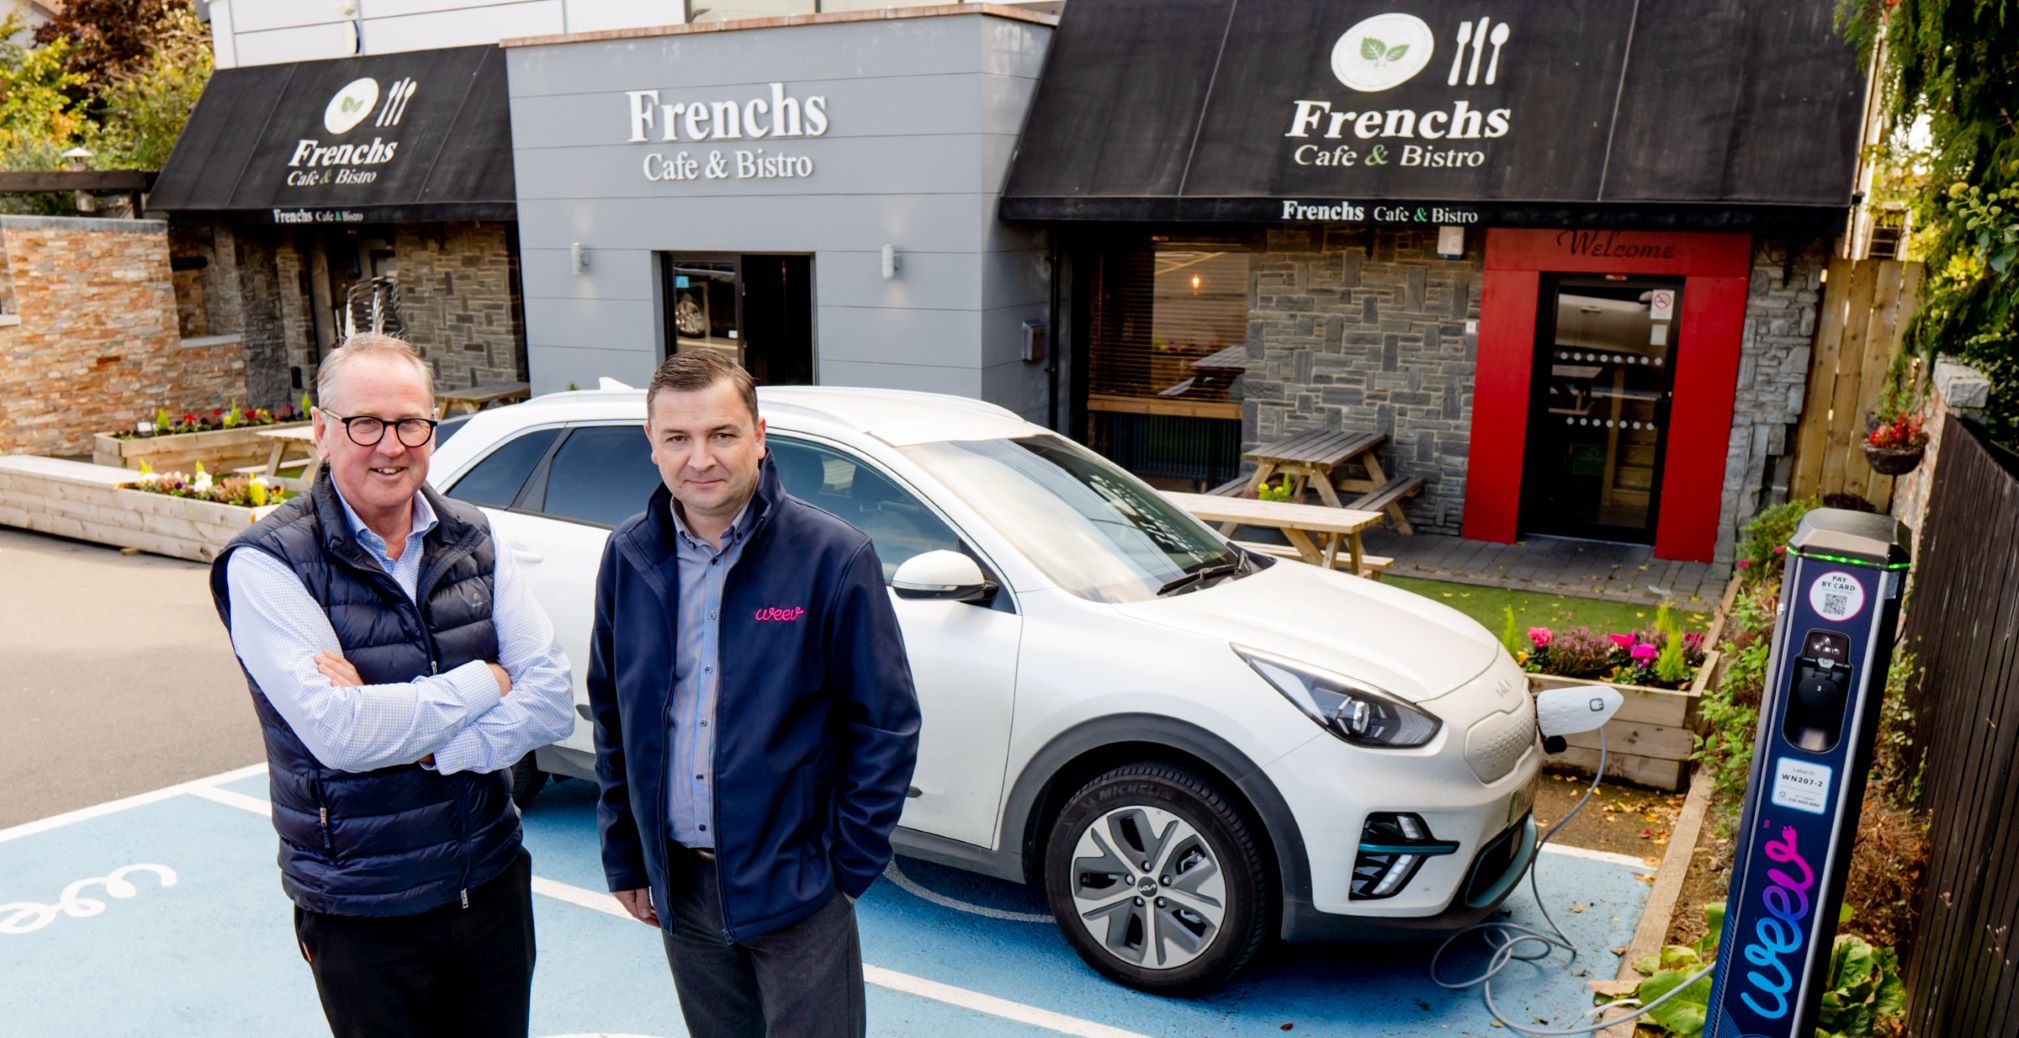 Weev installs EV charging points at French’s Cafe and Bistro as part of network expansion